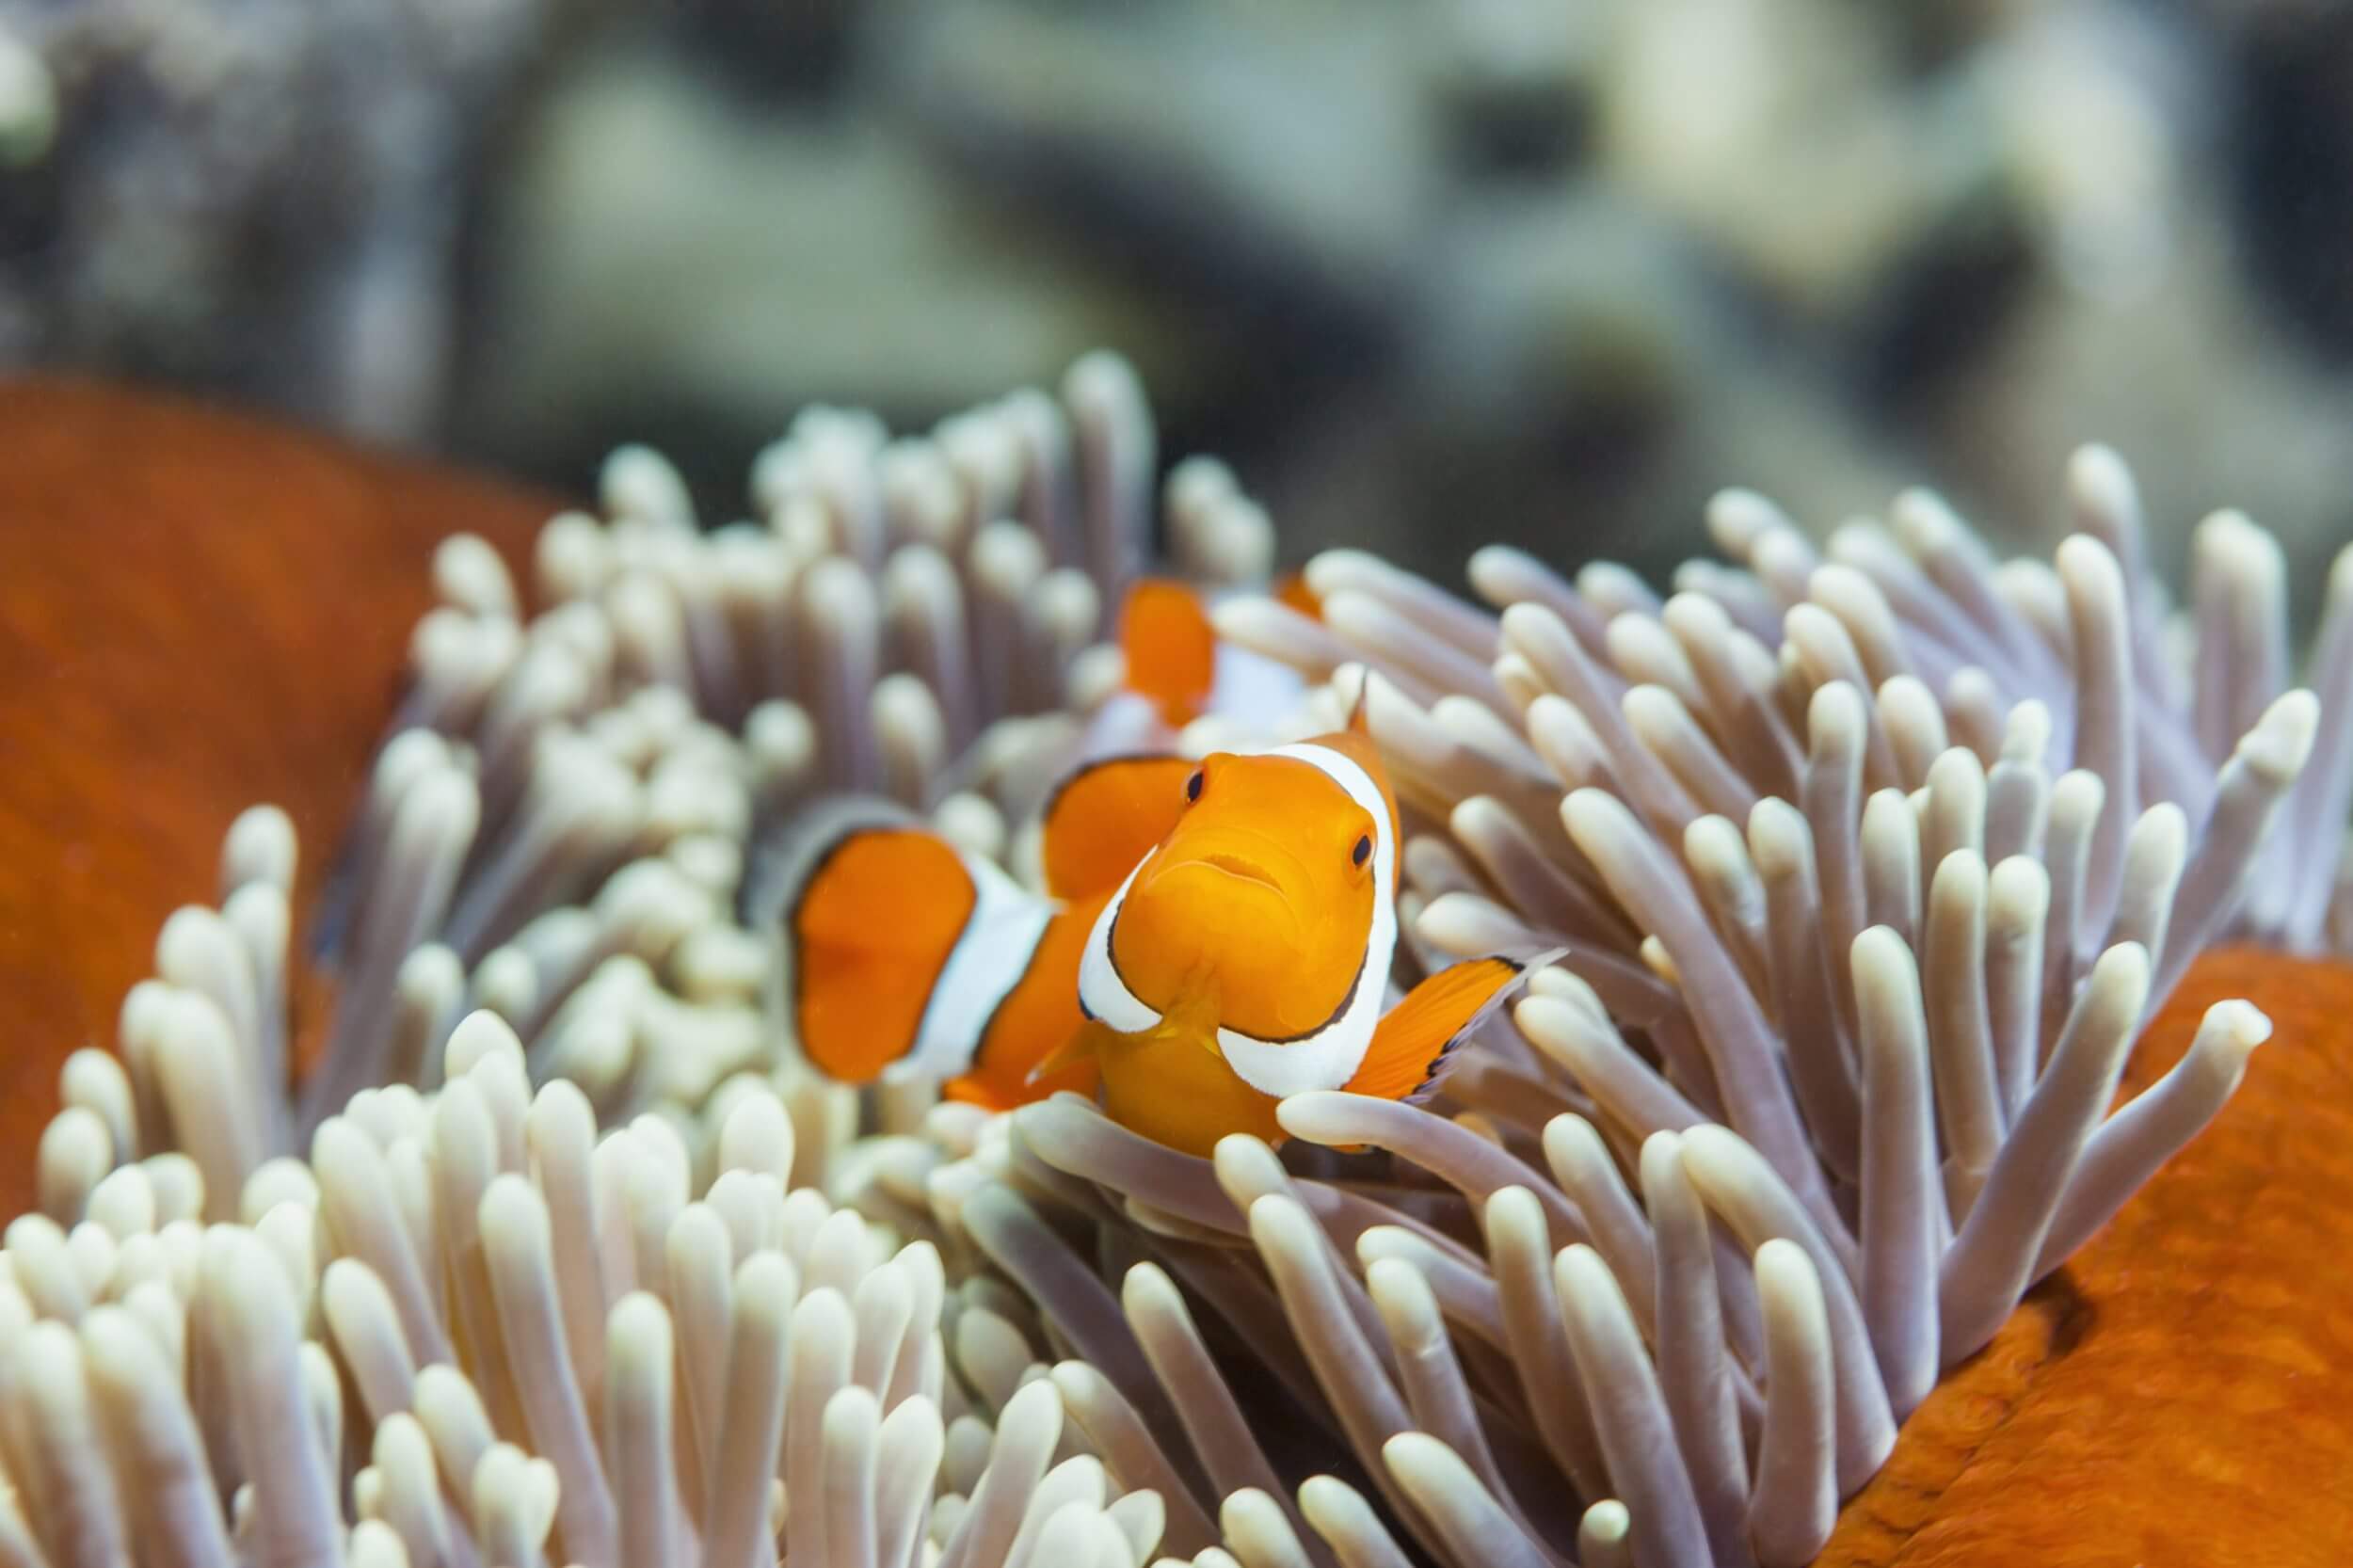 Australian Fundraising is partnering with the Great Barrier Reef Foundation in 2022.